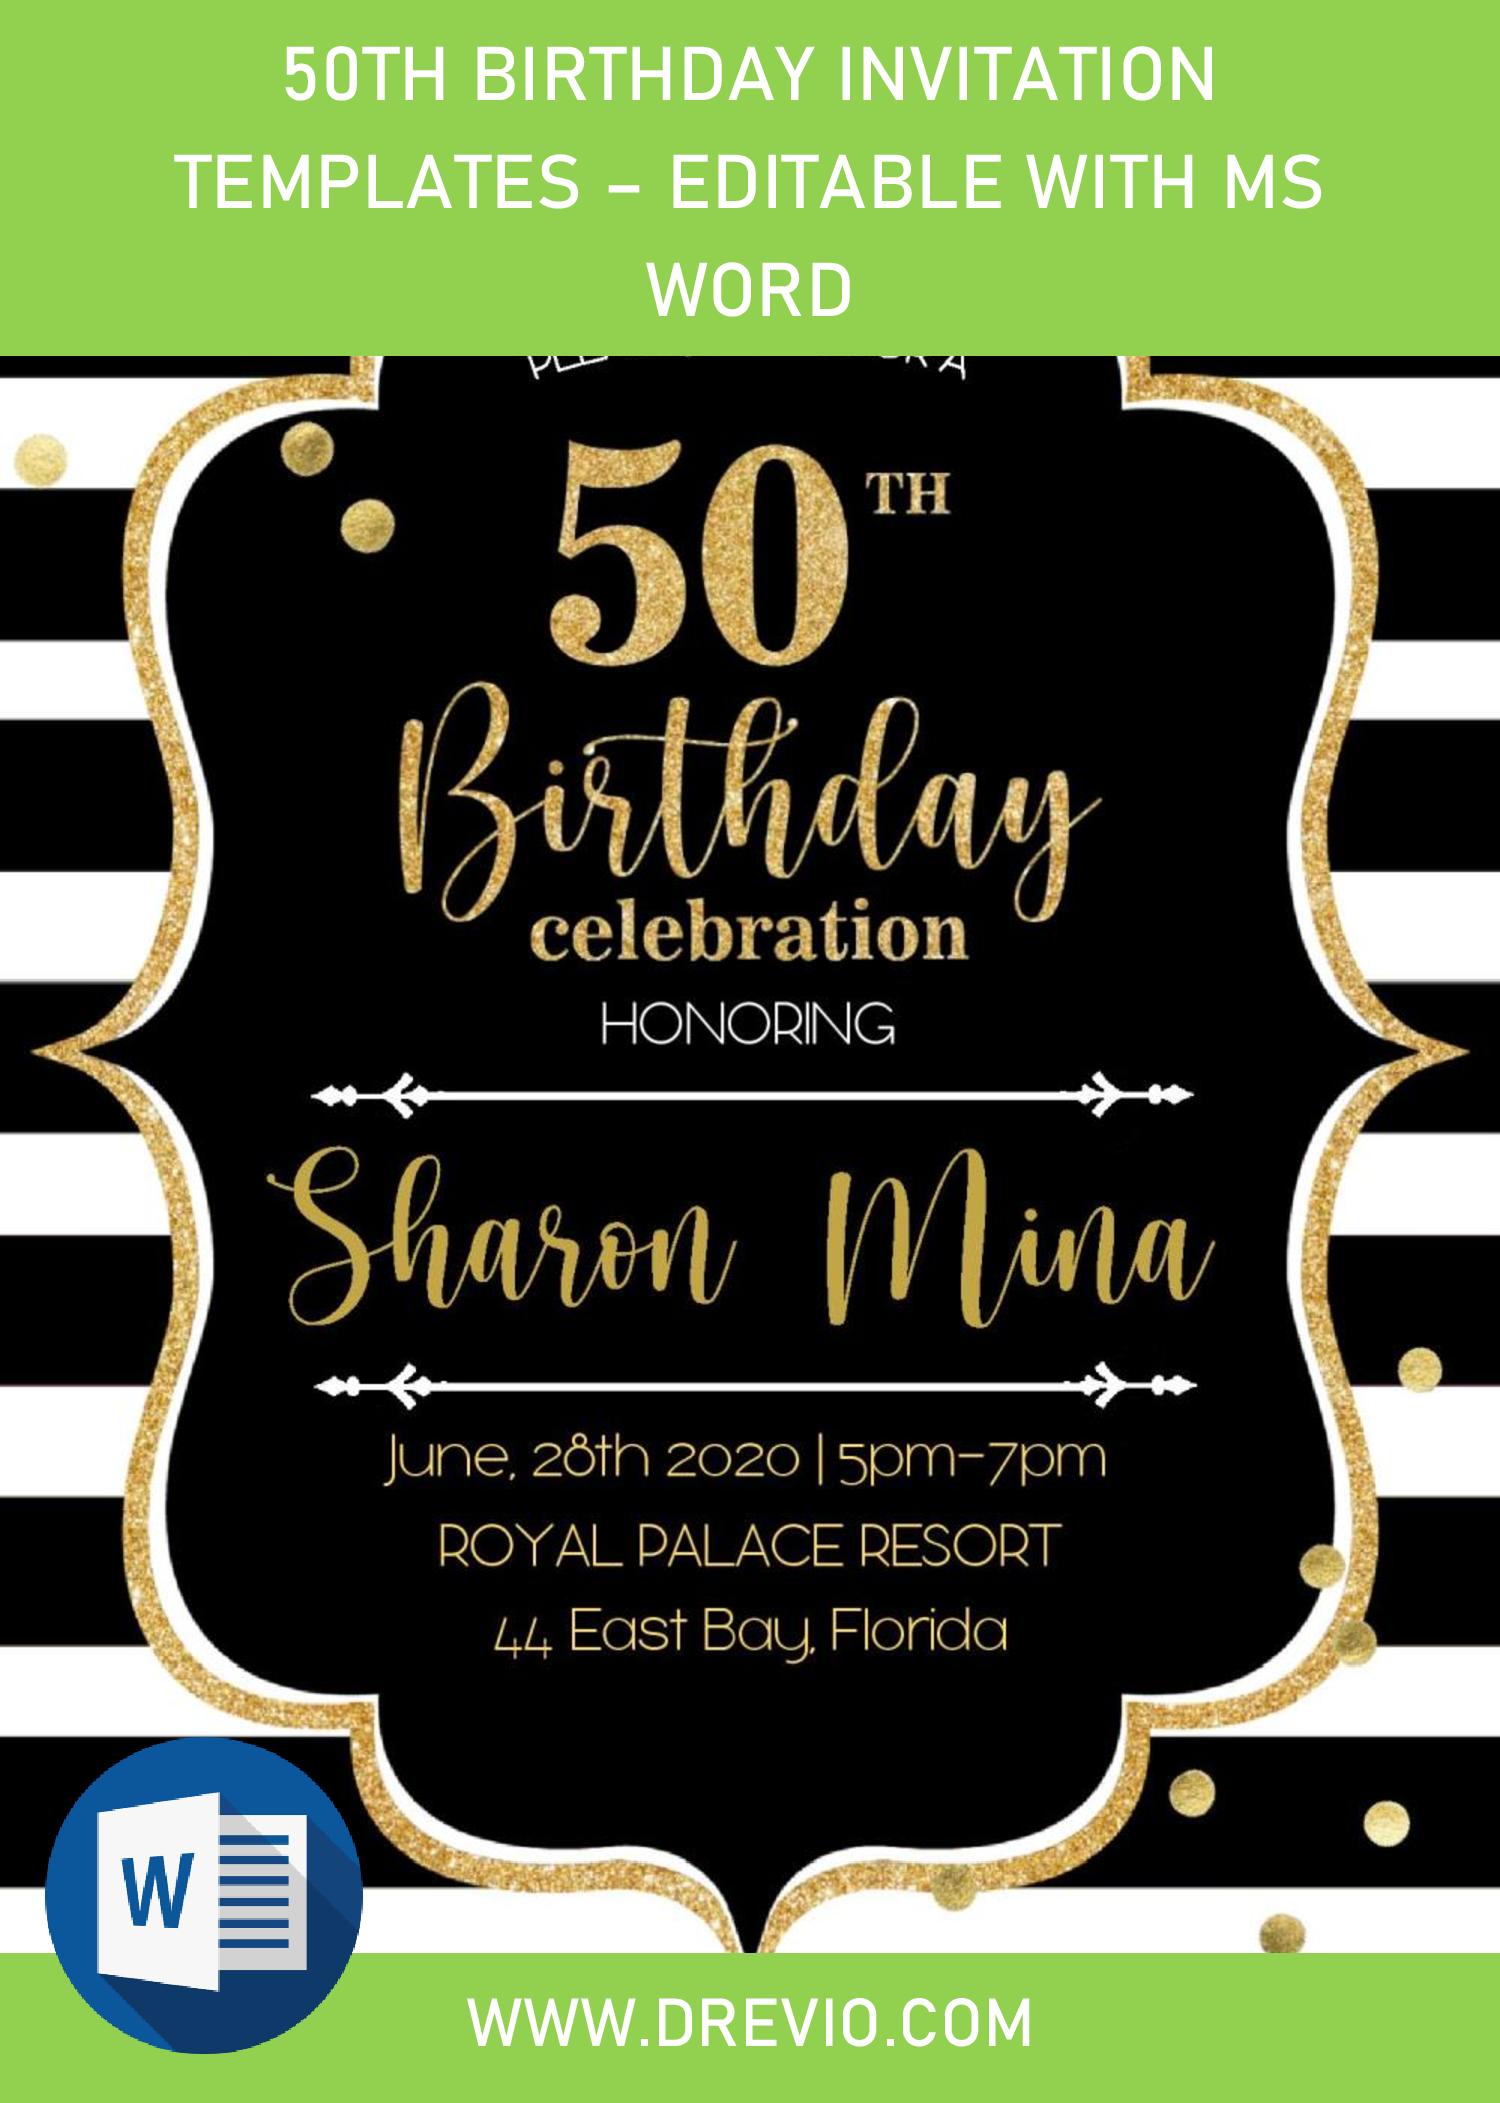 Black And Gold 50th Birthday Invitation Templates Editable With Ms Word Download Hundreds Free Printable Birthday Invitation Templates